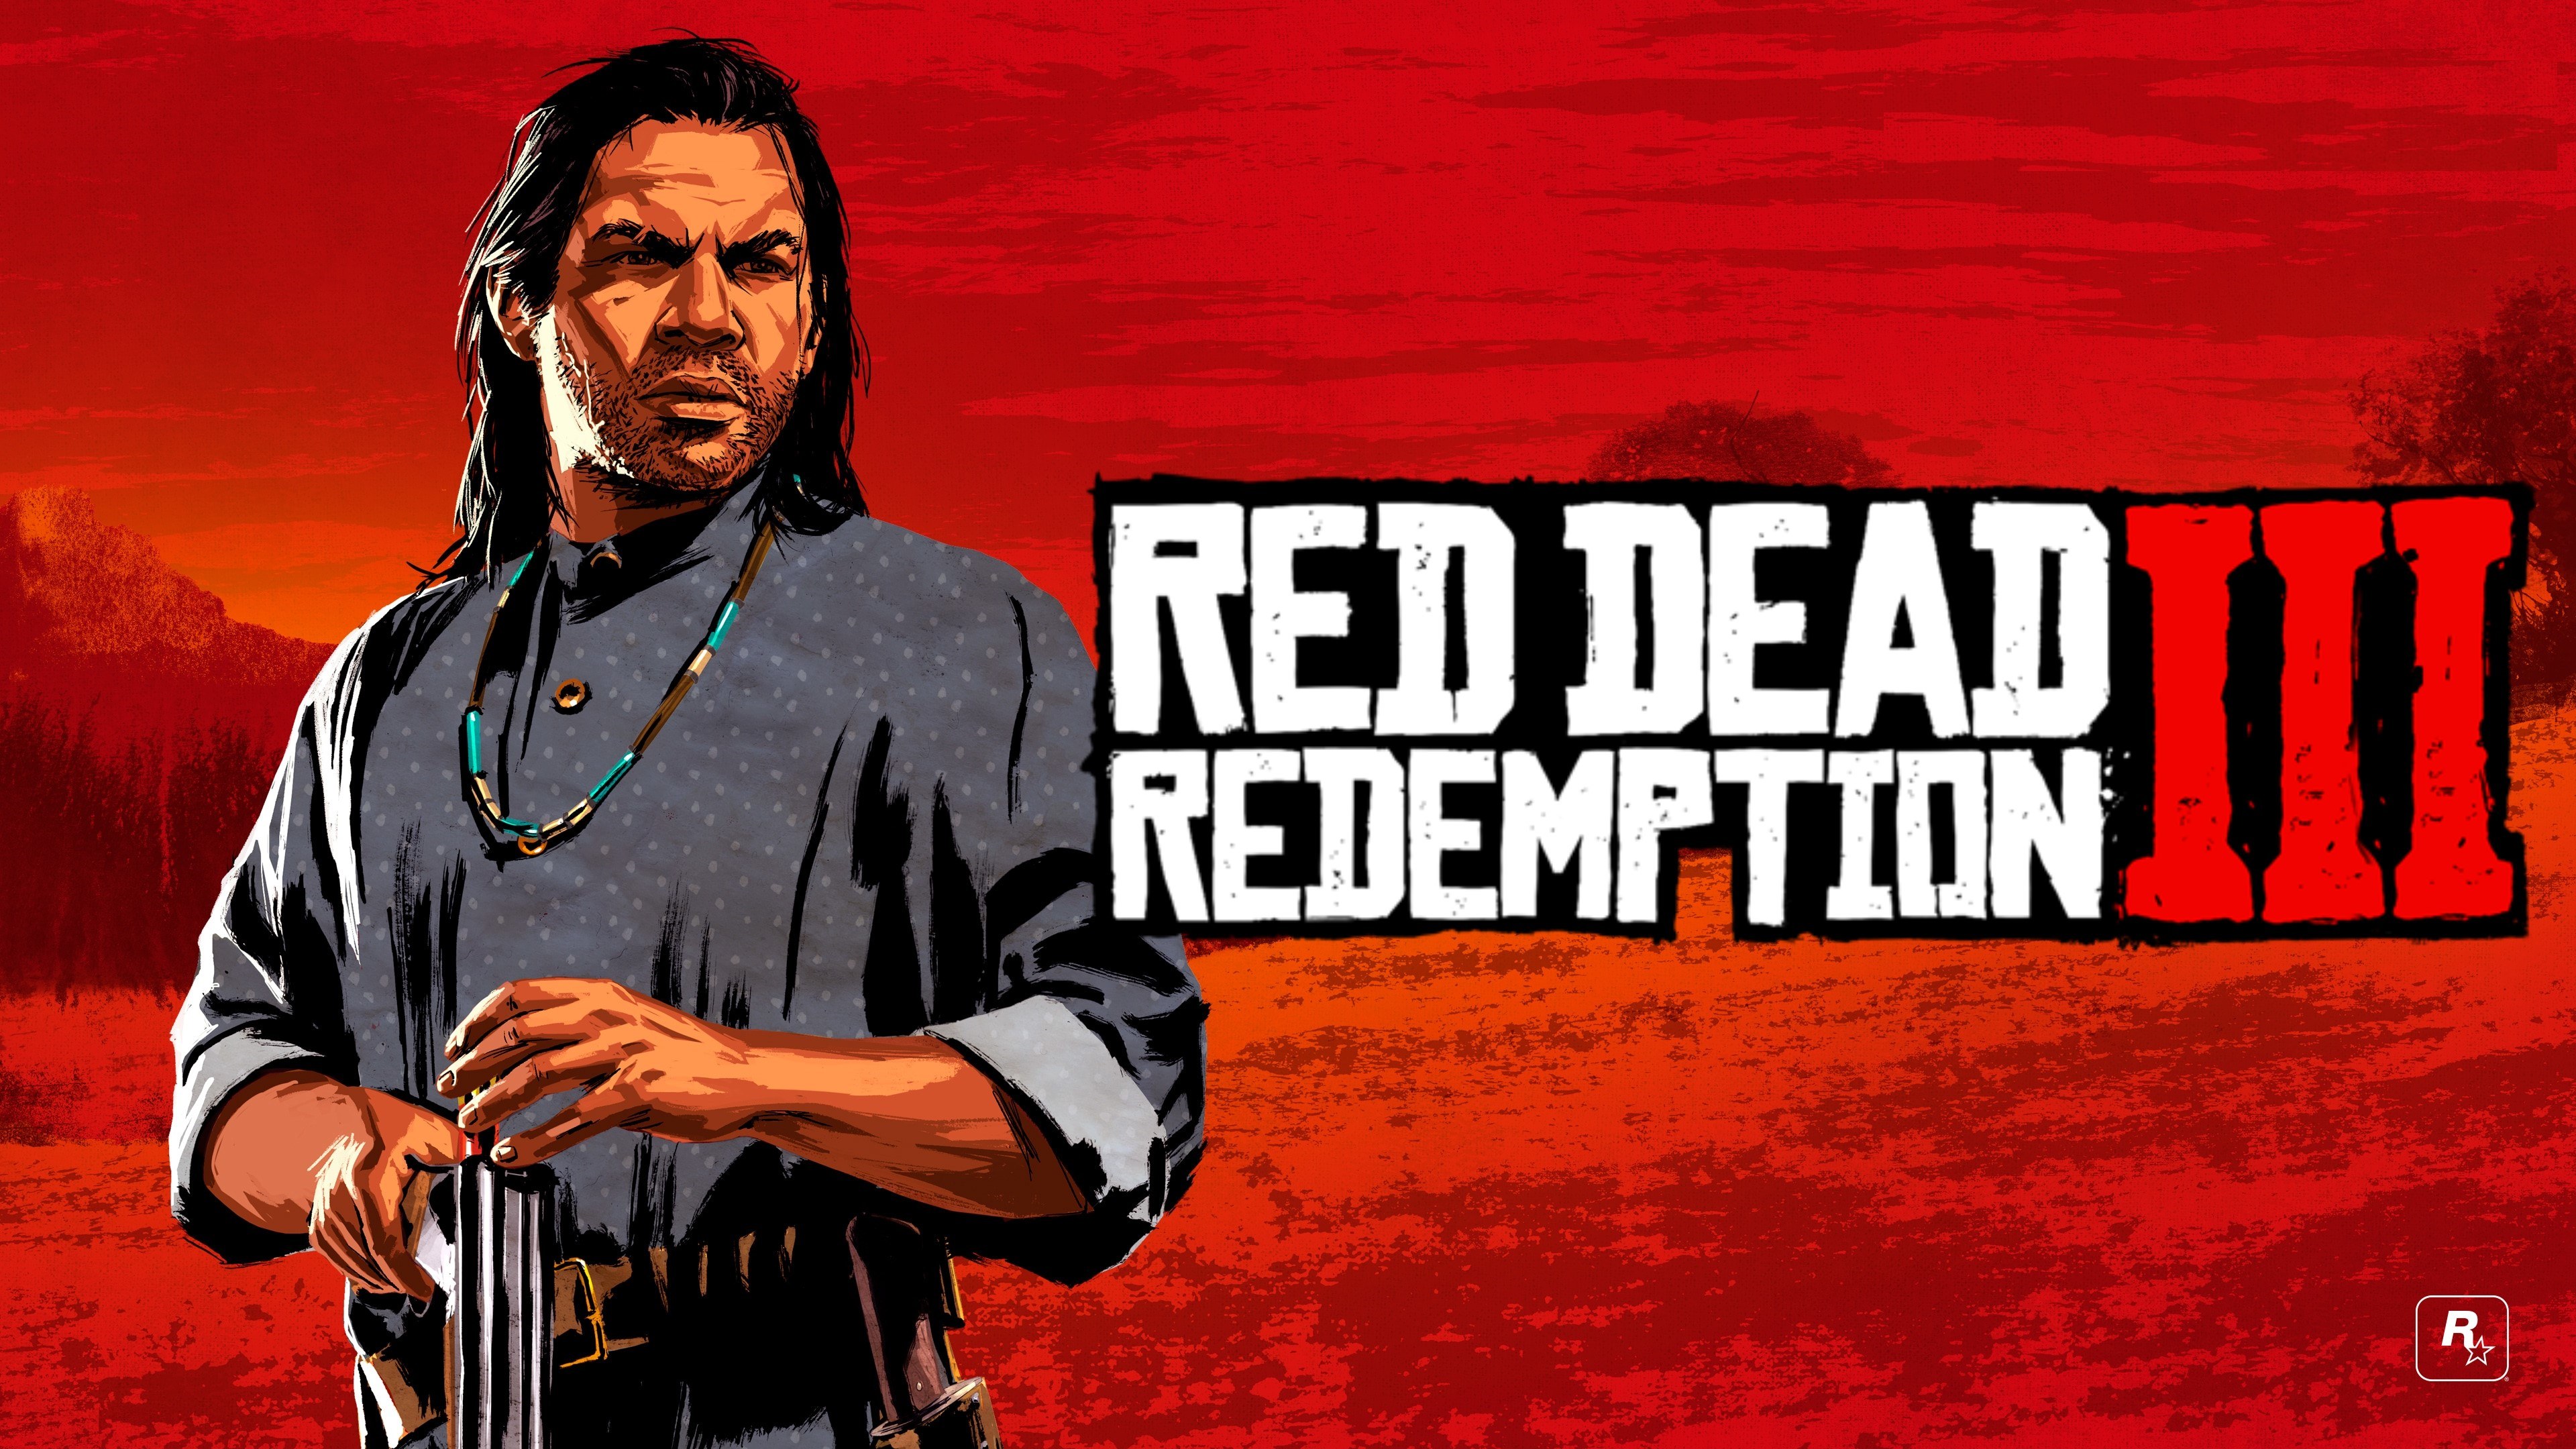 nedenunder Paine Gillic Påvirke RDR 3: Everything We Know About Red Dead Redemption 3 | EarlyGame